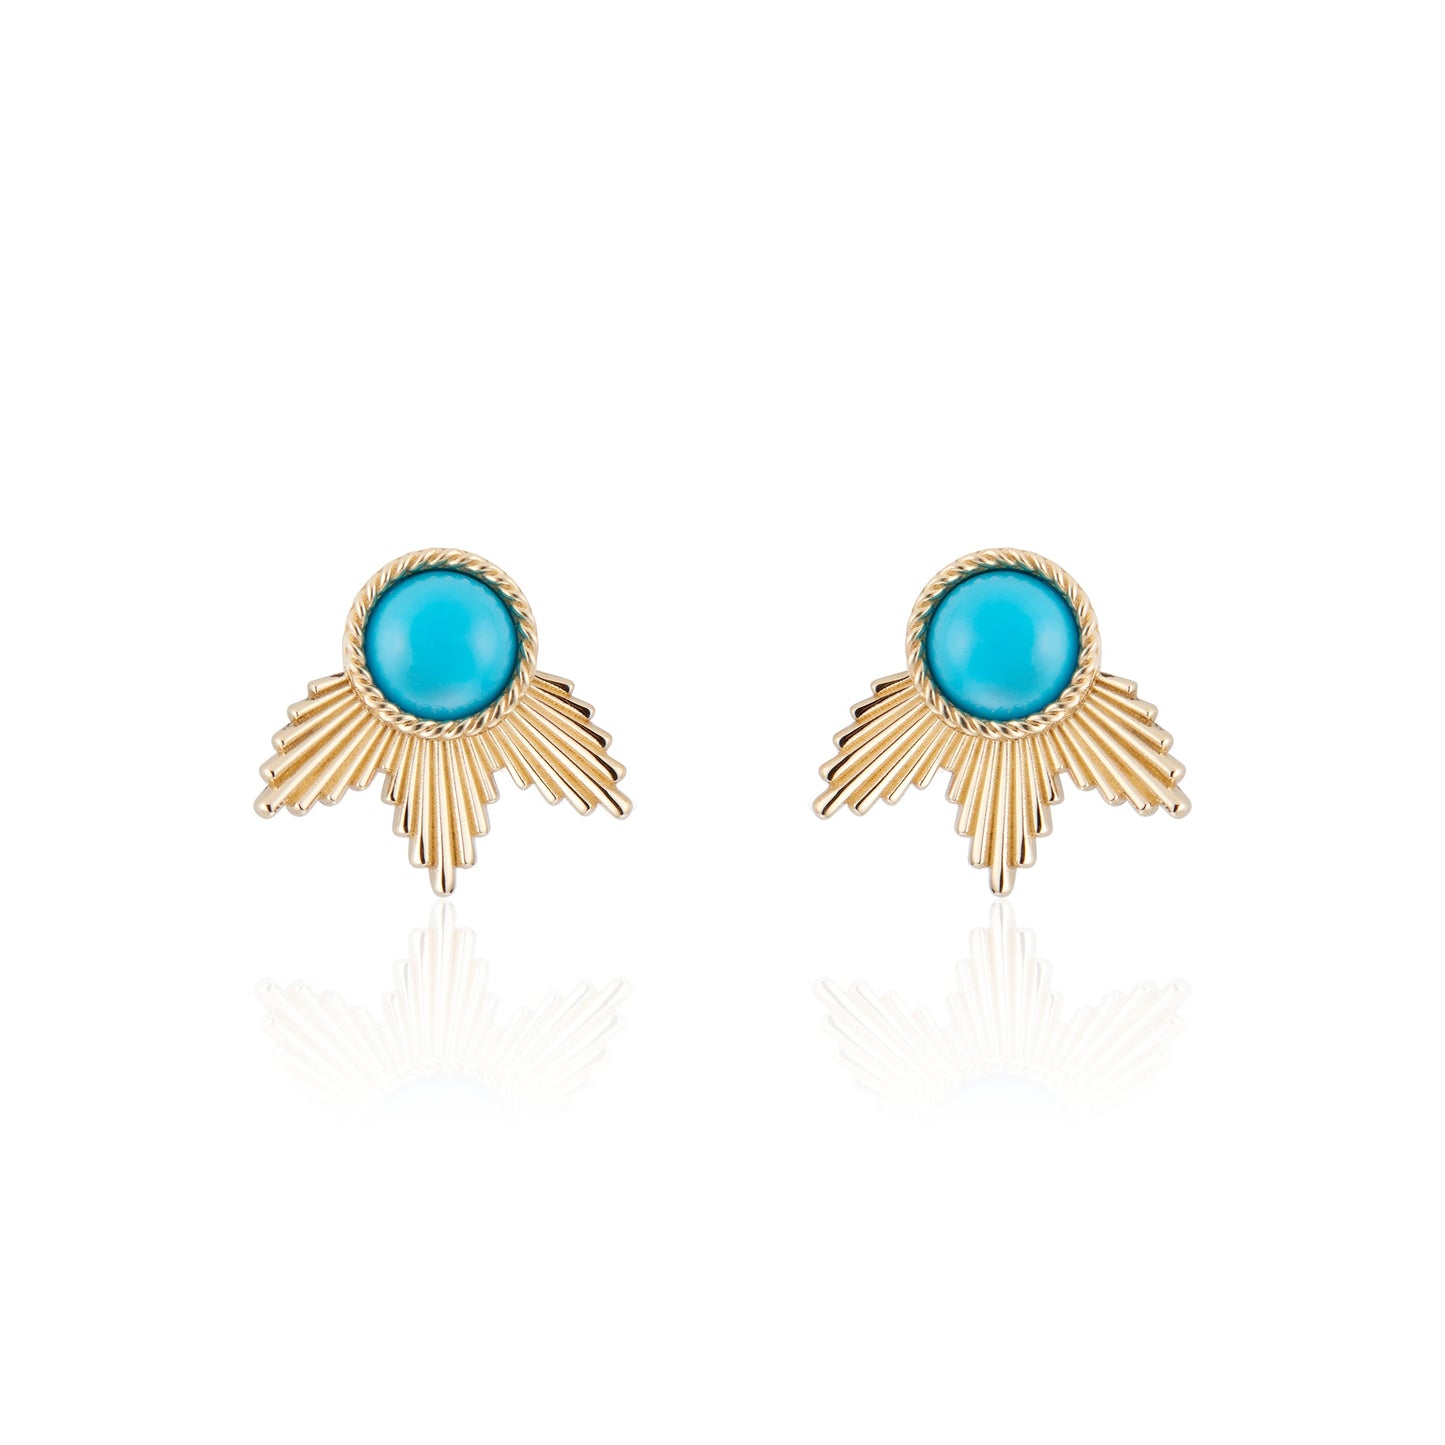 Revival Icarus Earrings with Turquoise